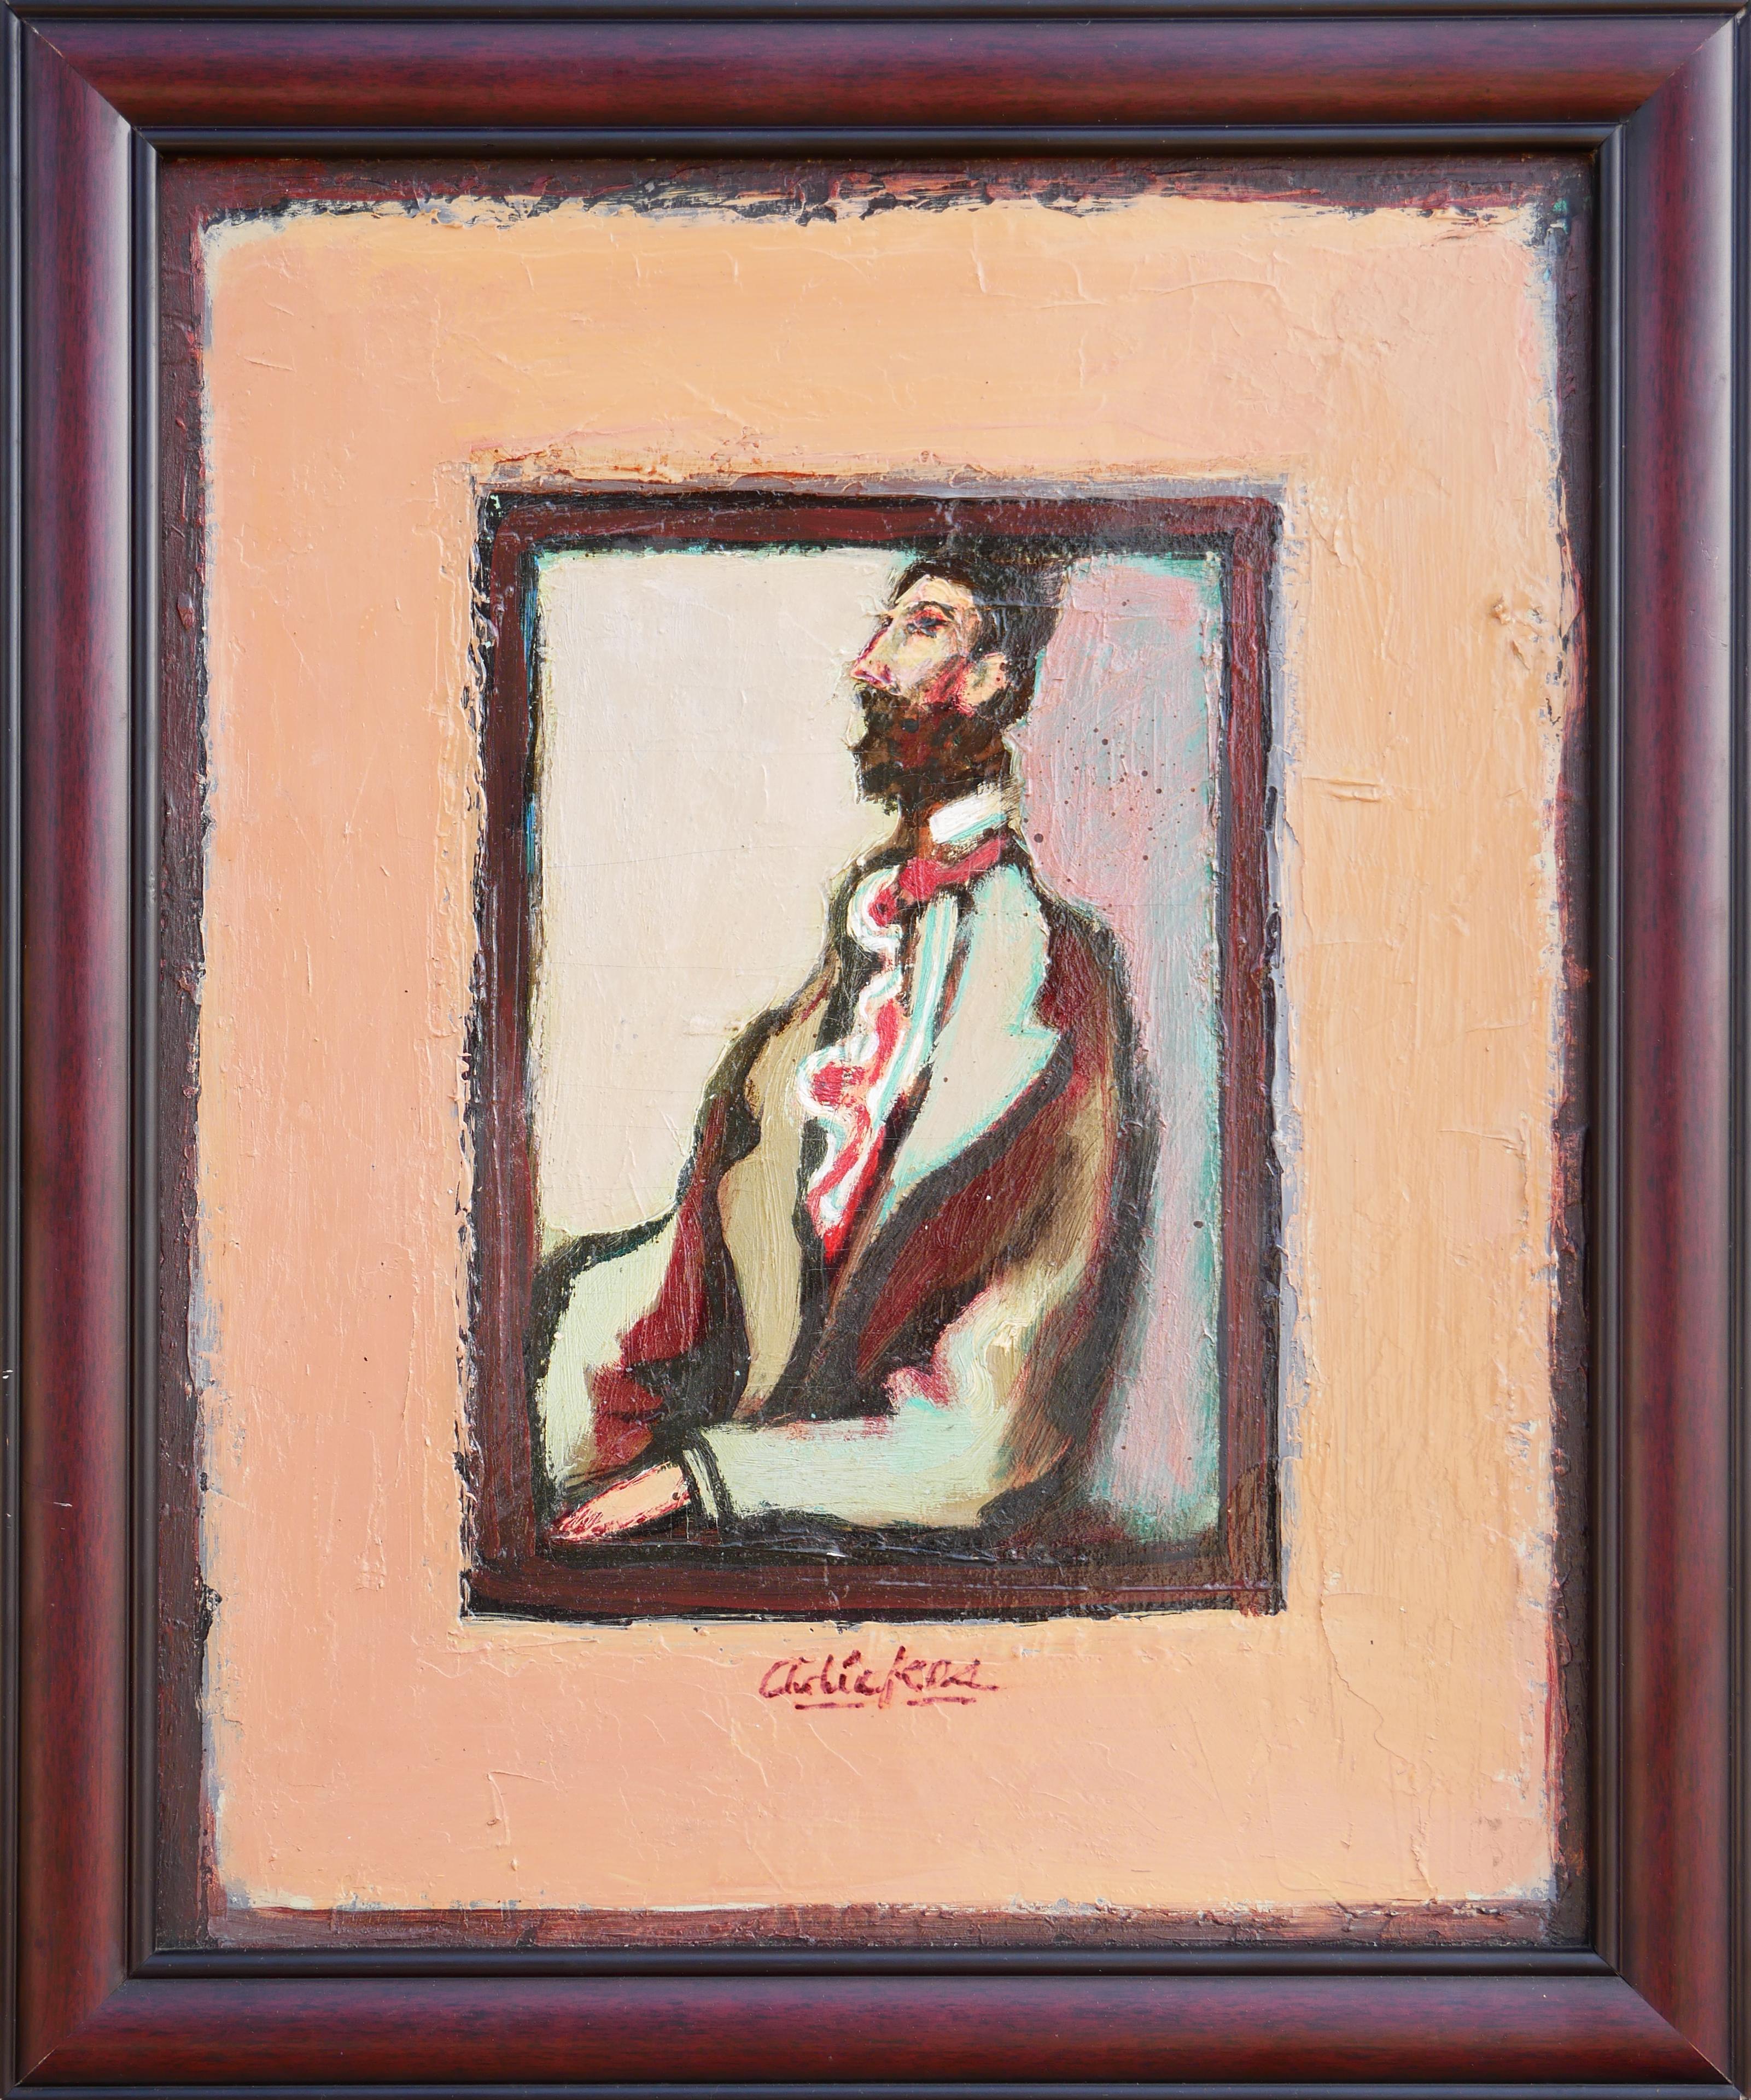 David Adickes Figurative Painting - "The Visitor" Modern Abstract Figurative Portrait Painting of a Seated Man